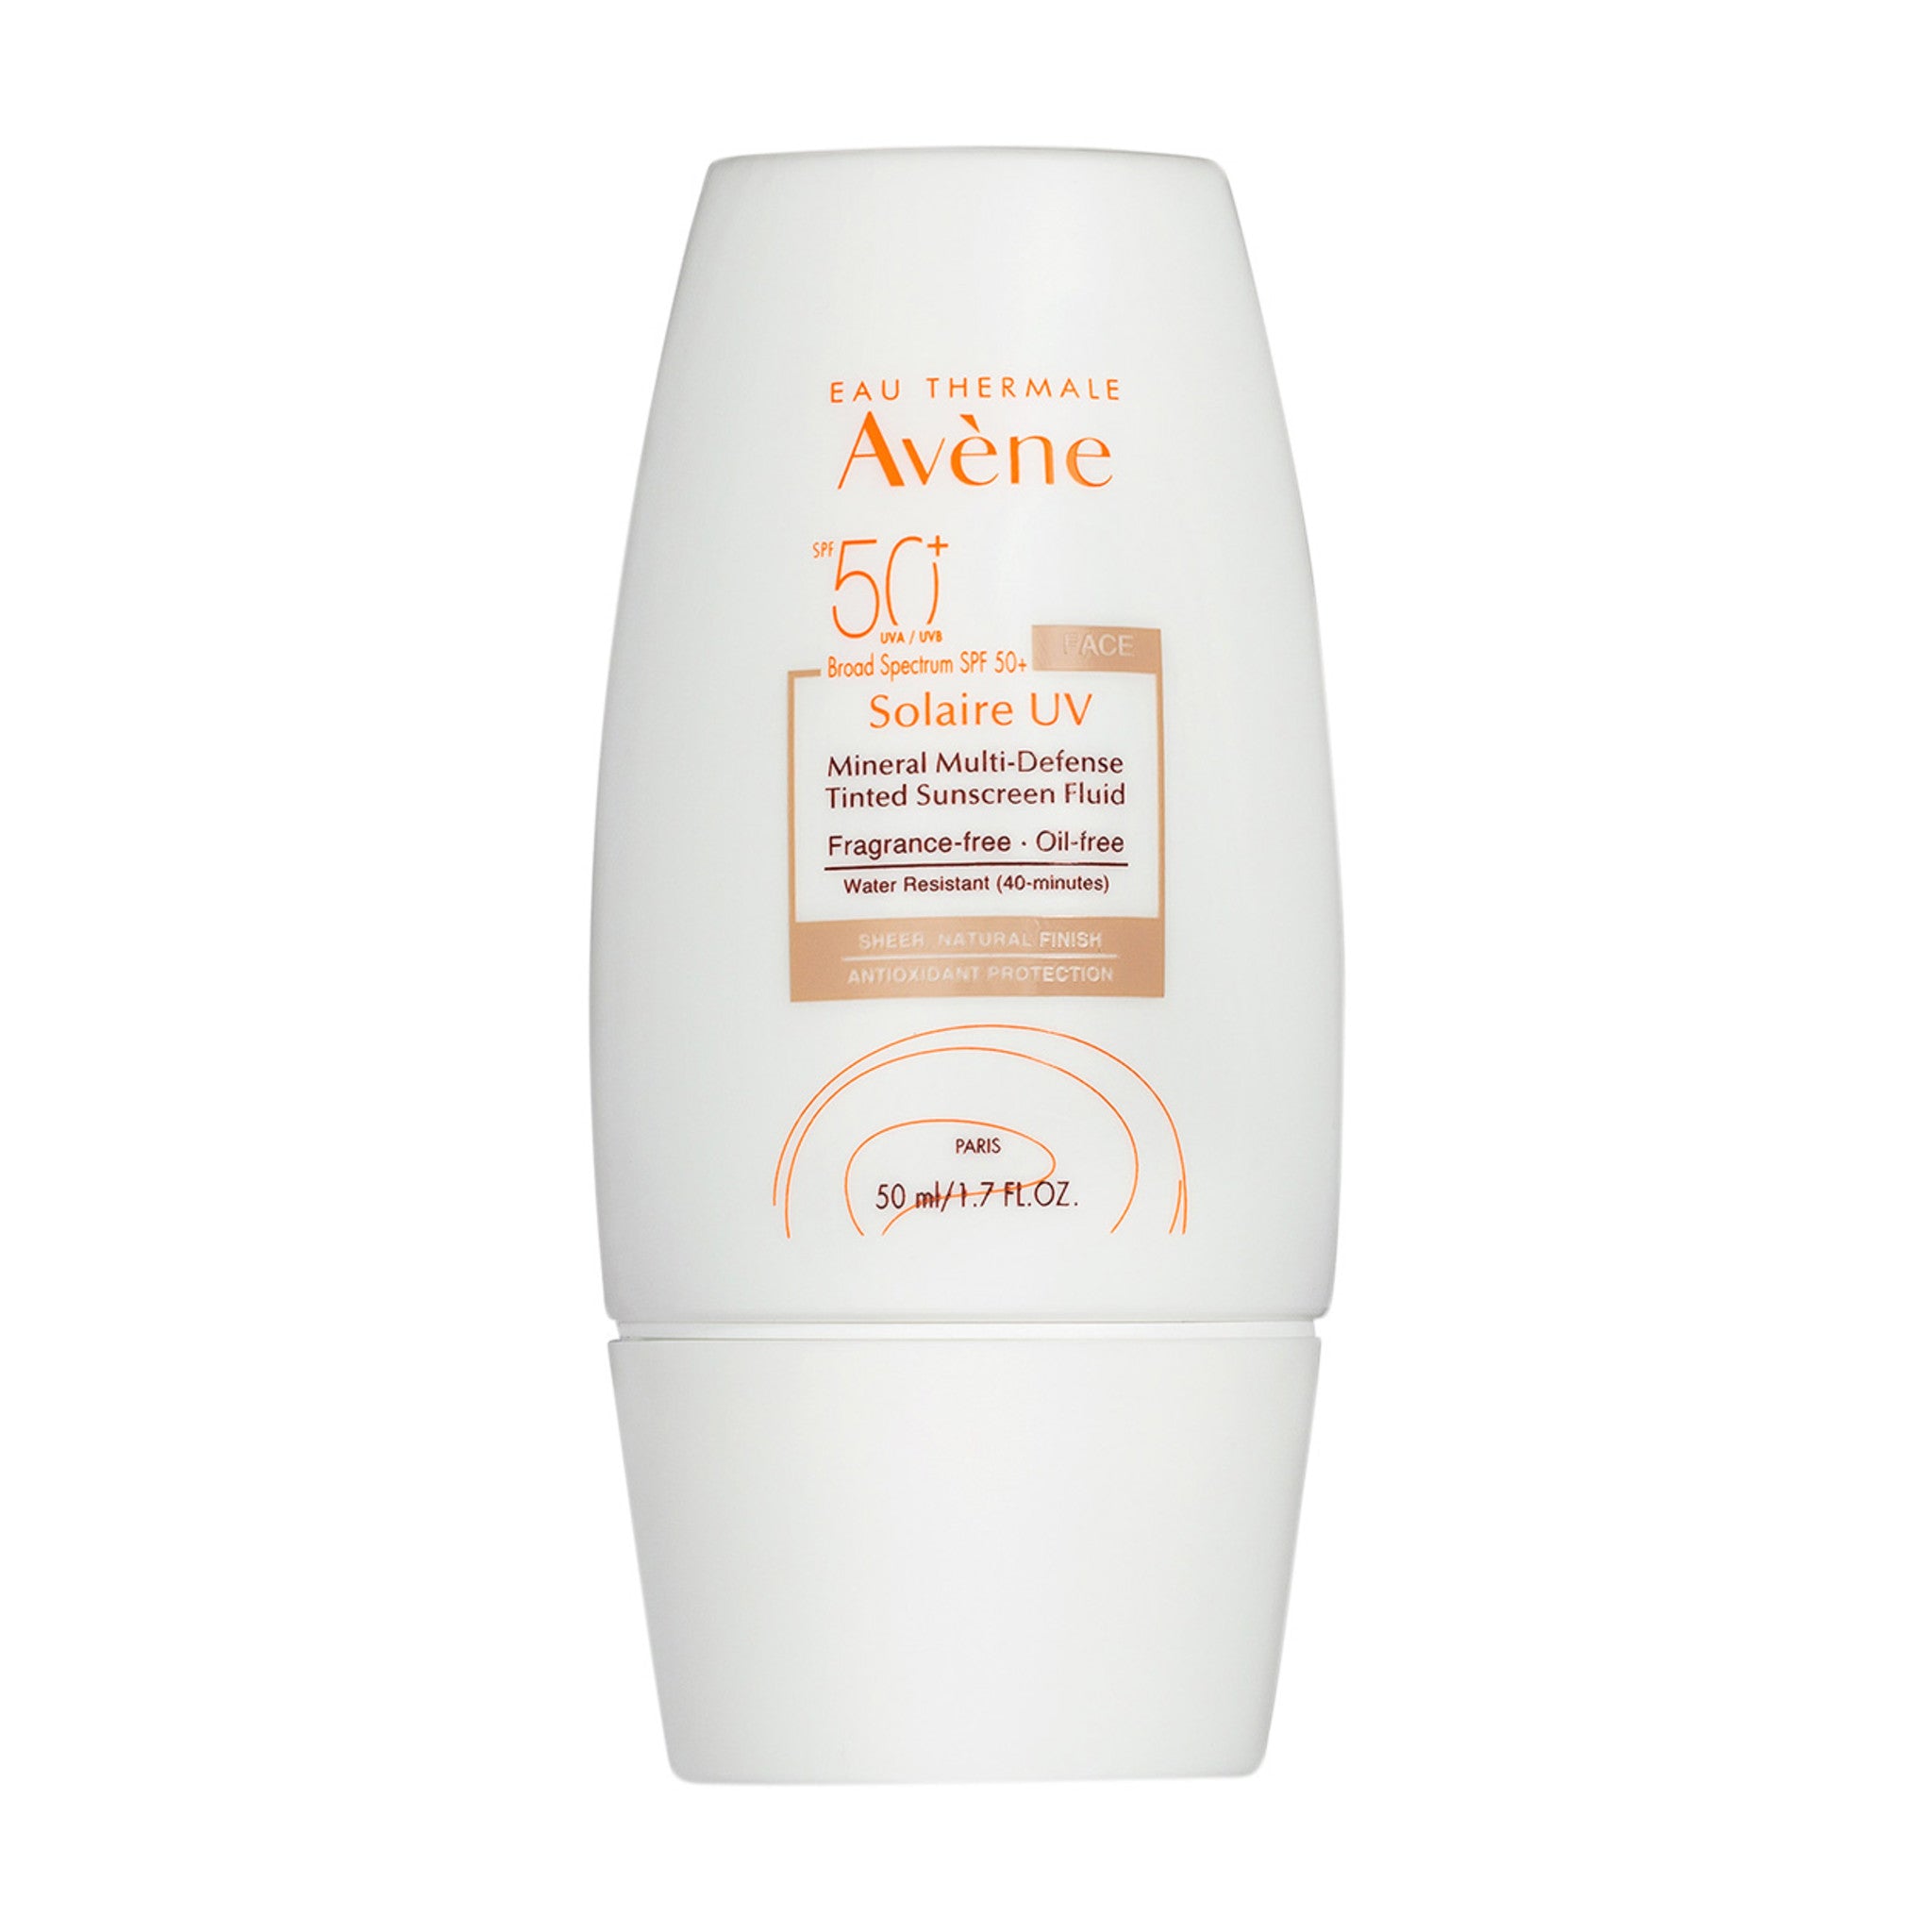 Avène Solaire UV Mineral Multi-Defense Tinted Sunscreen Fluid SPF 50+ main image.